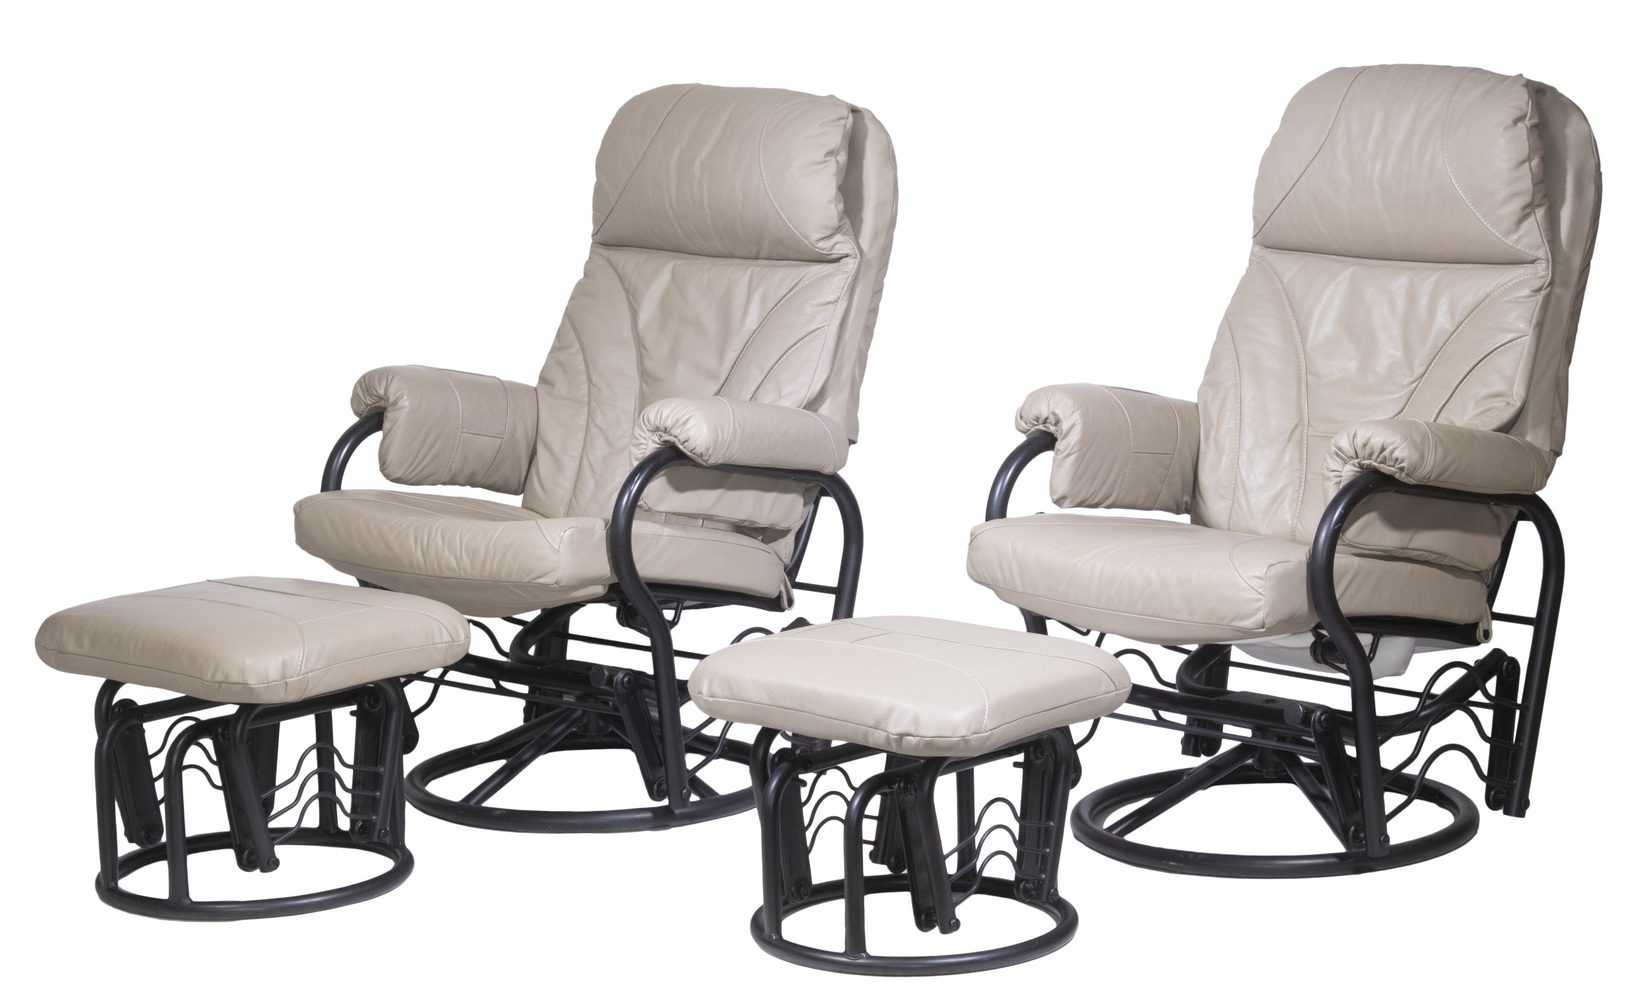 PR MODERN RECLINING CHAIRS WITH 302c0f